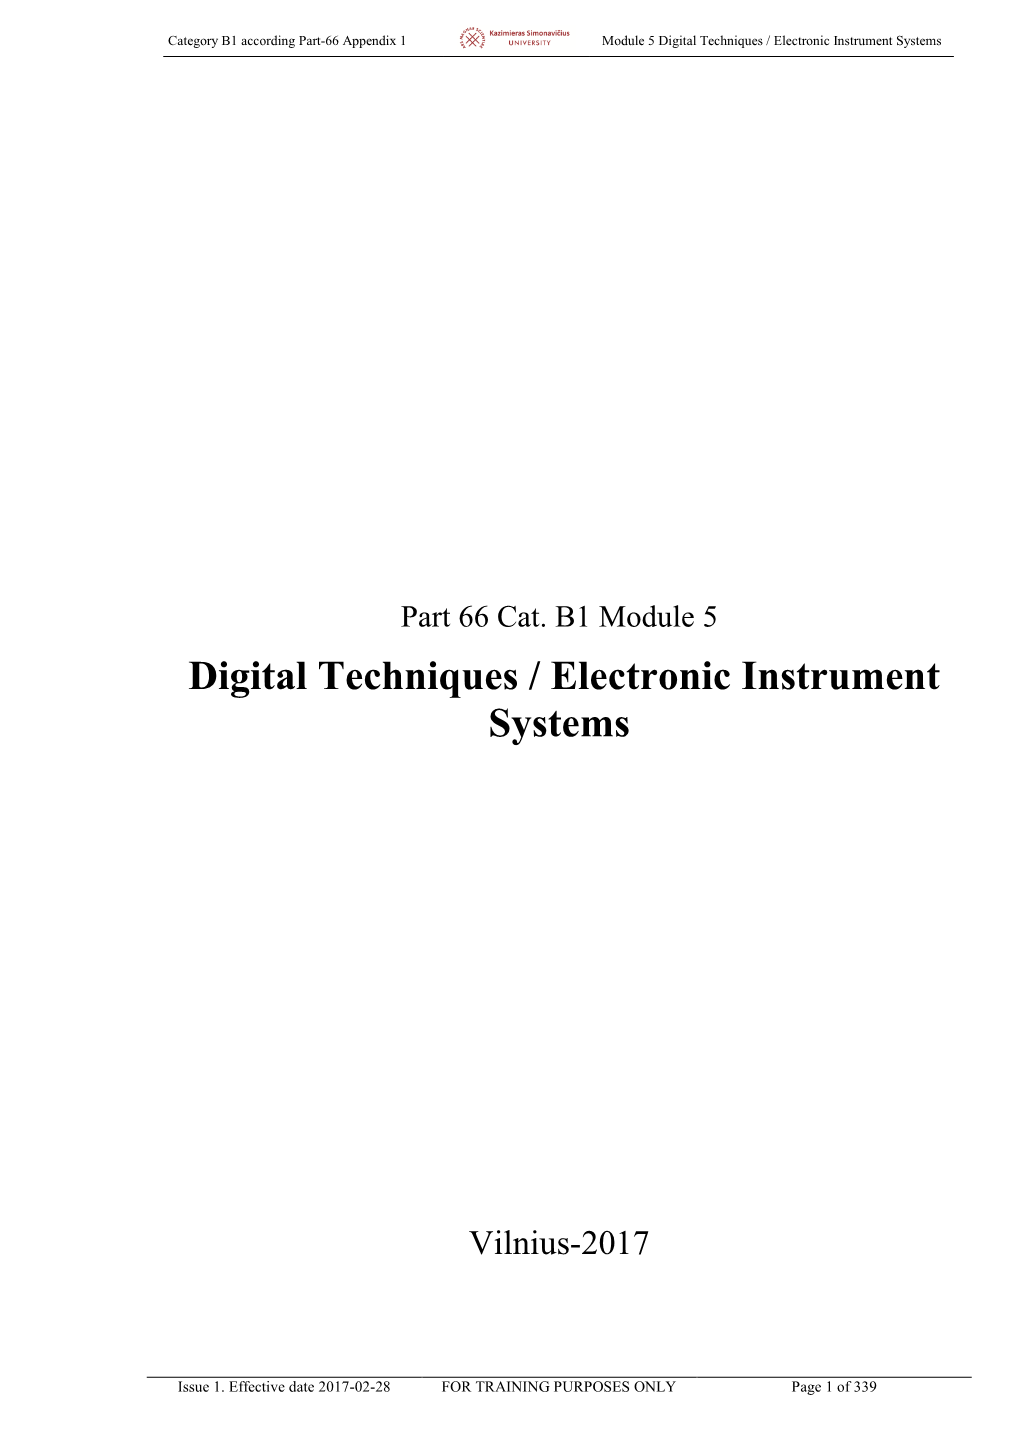 Digital Techniques / Electronic Instrument Systems